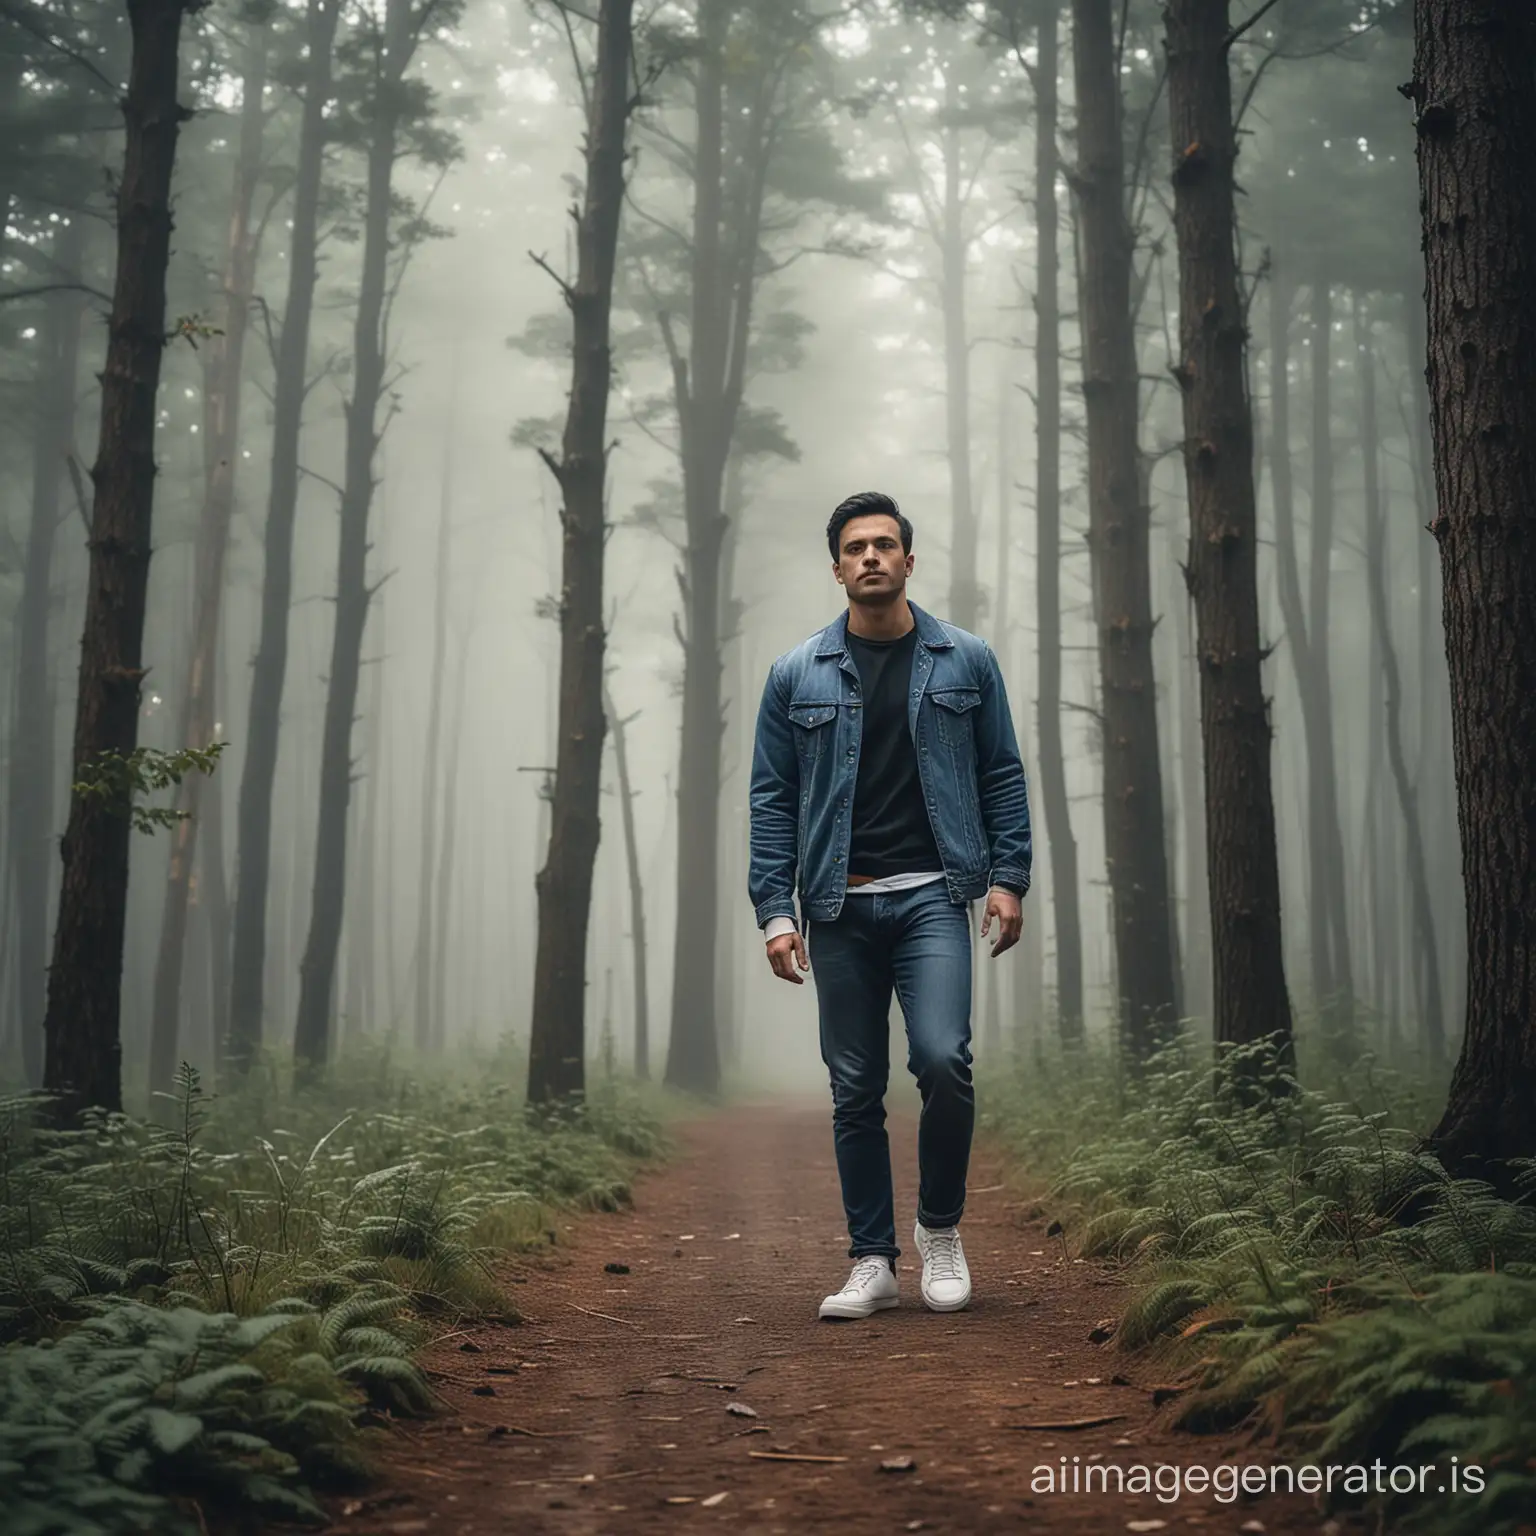 Cinematic-Portrait-of-a-Stylish-30YearOld-Man-in-a-Misty-Forest